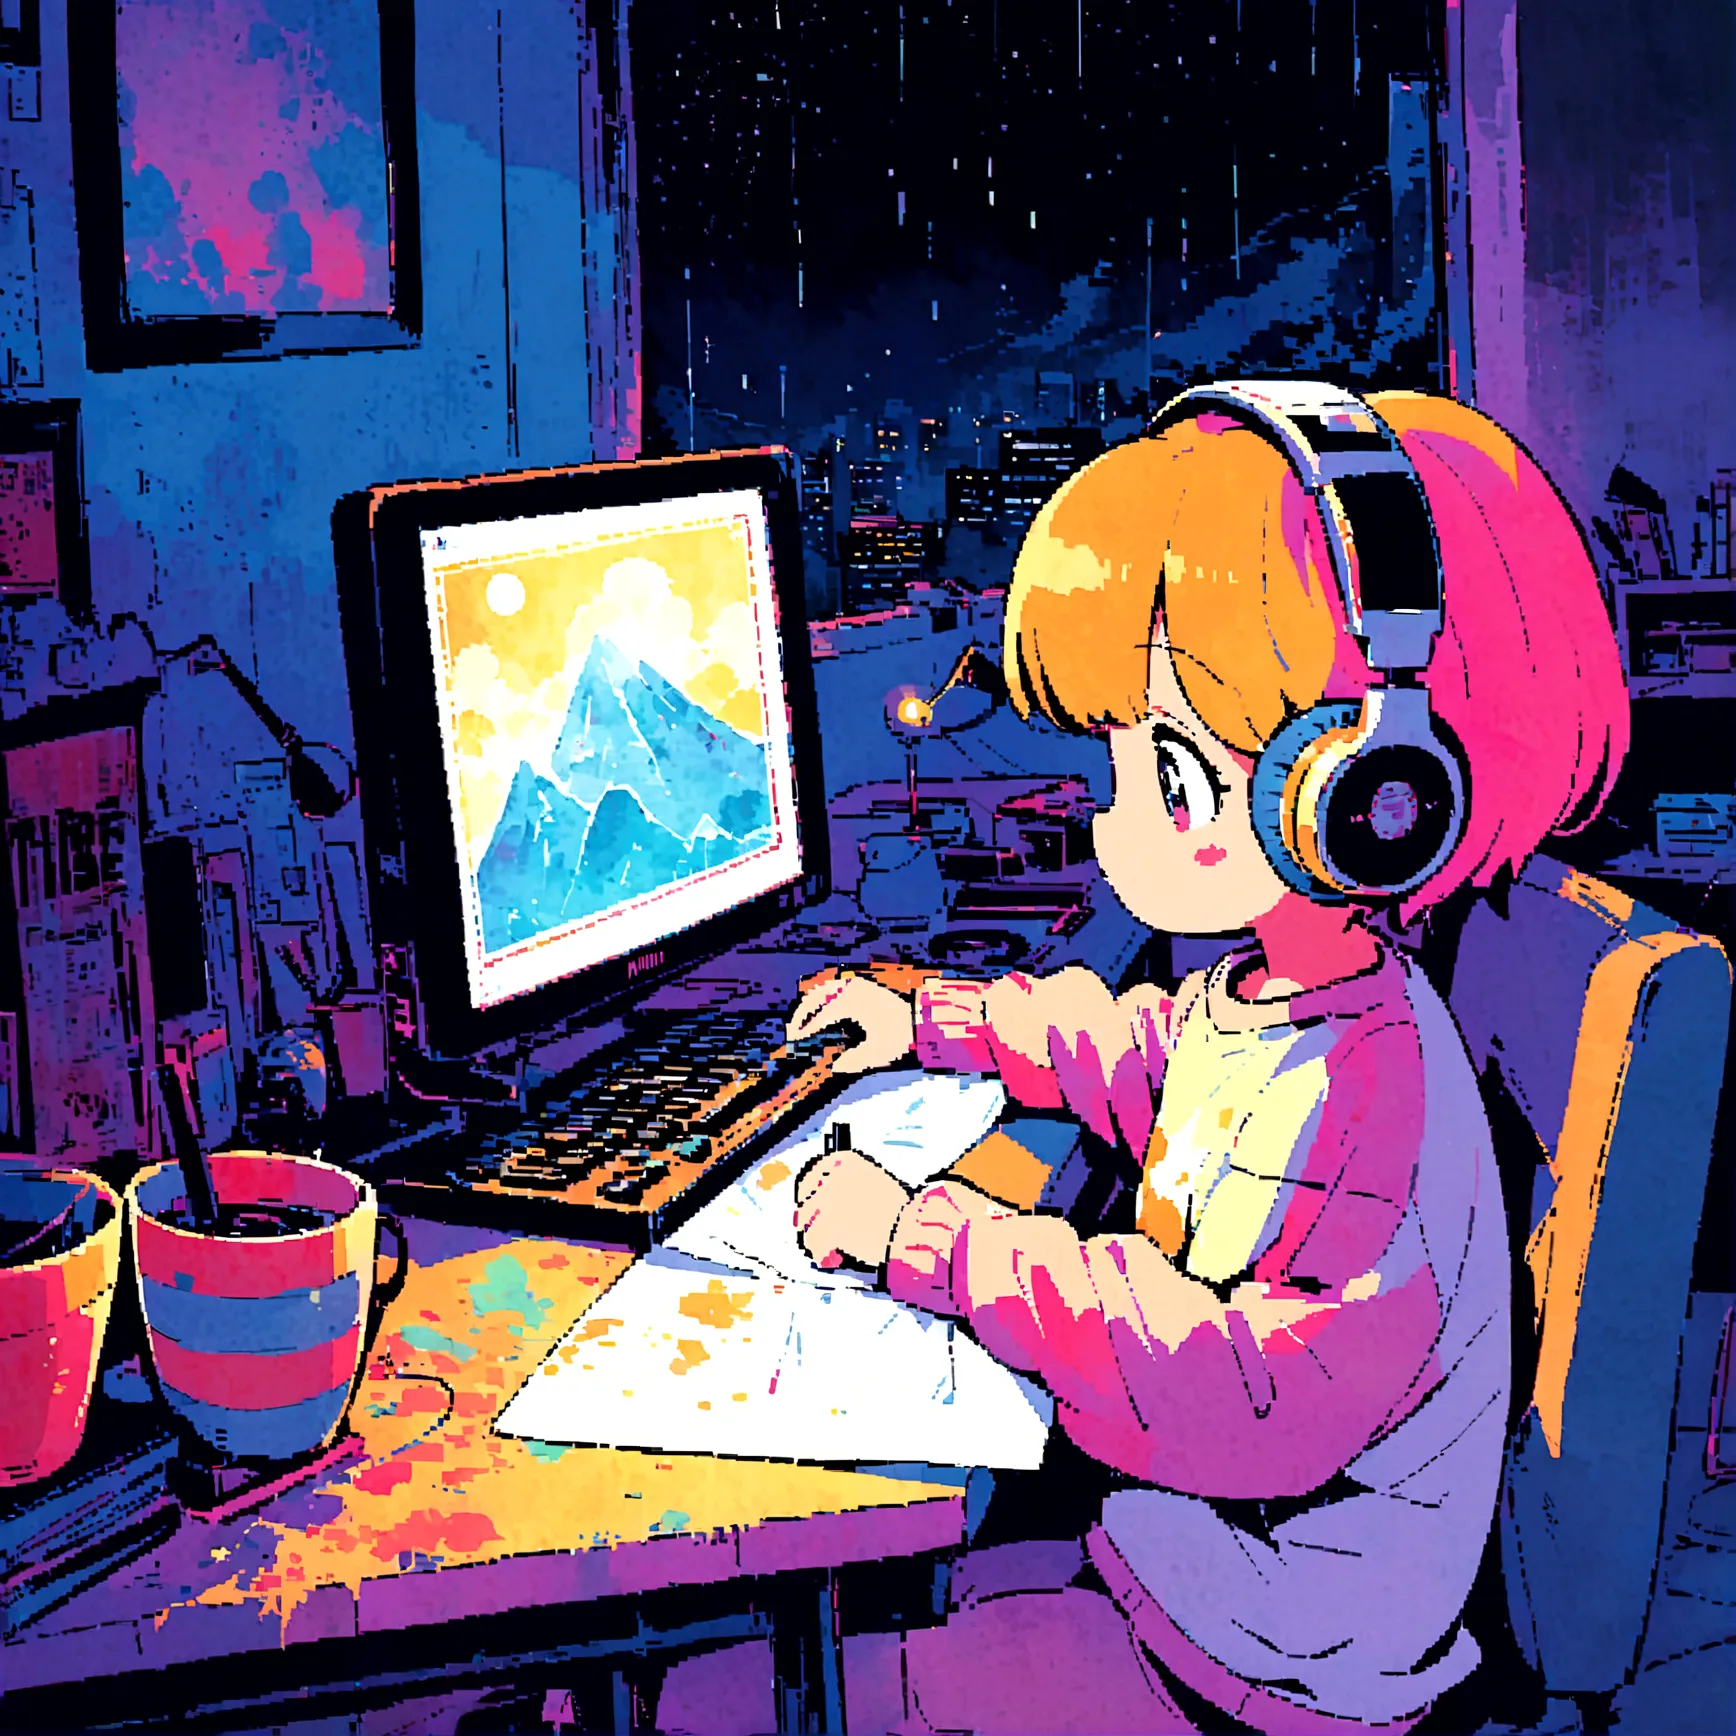 (zero), Girl studying in room, Reading a book, Wear headphones, , night lighting, Neon scenery on a rainy day,Analog Color Theme...